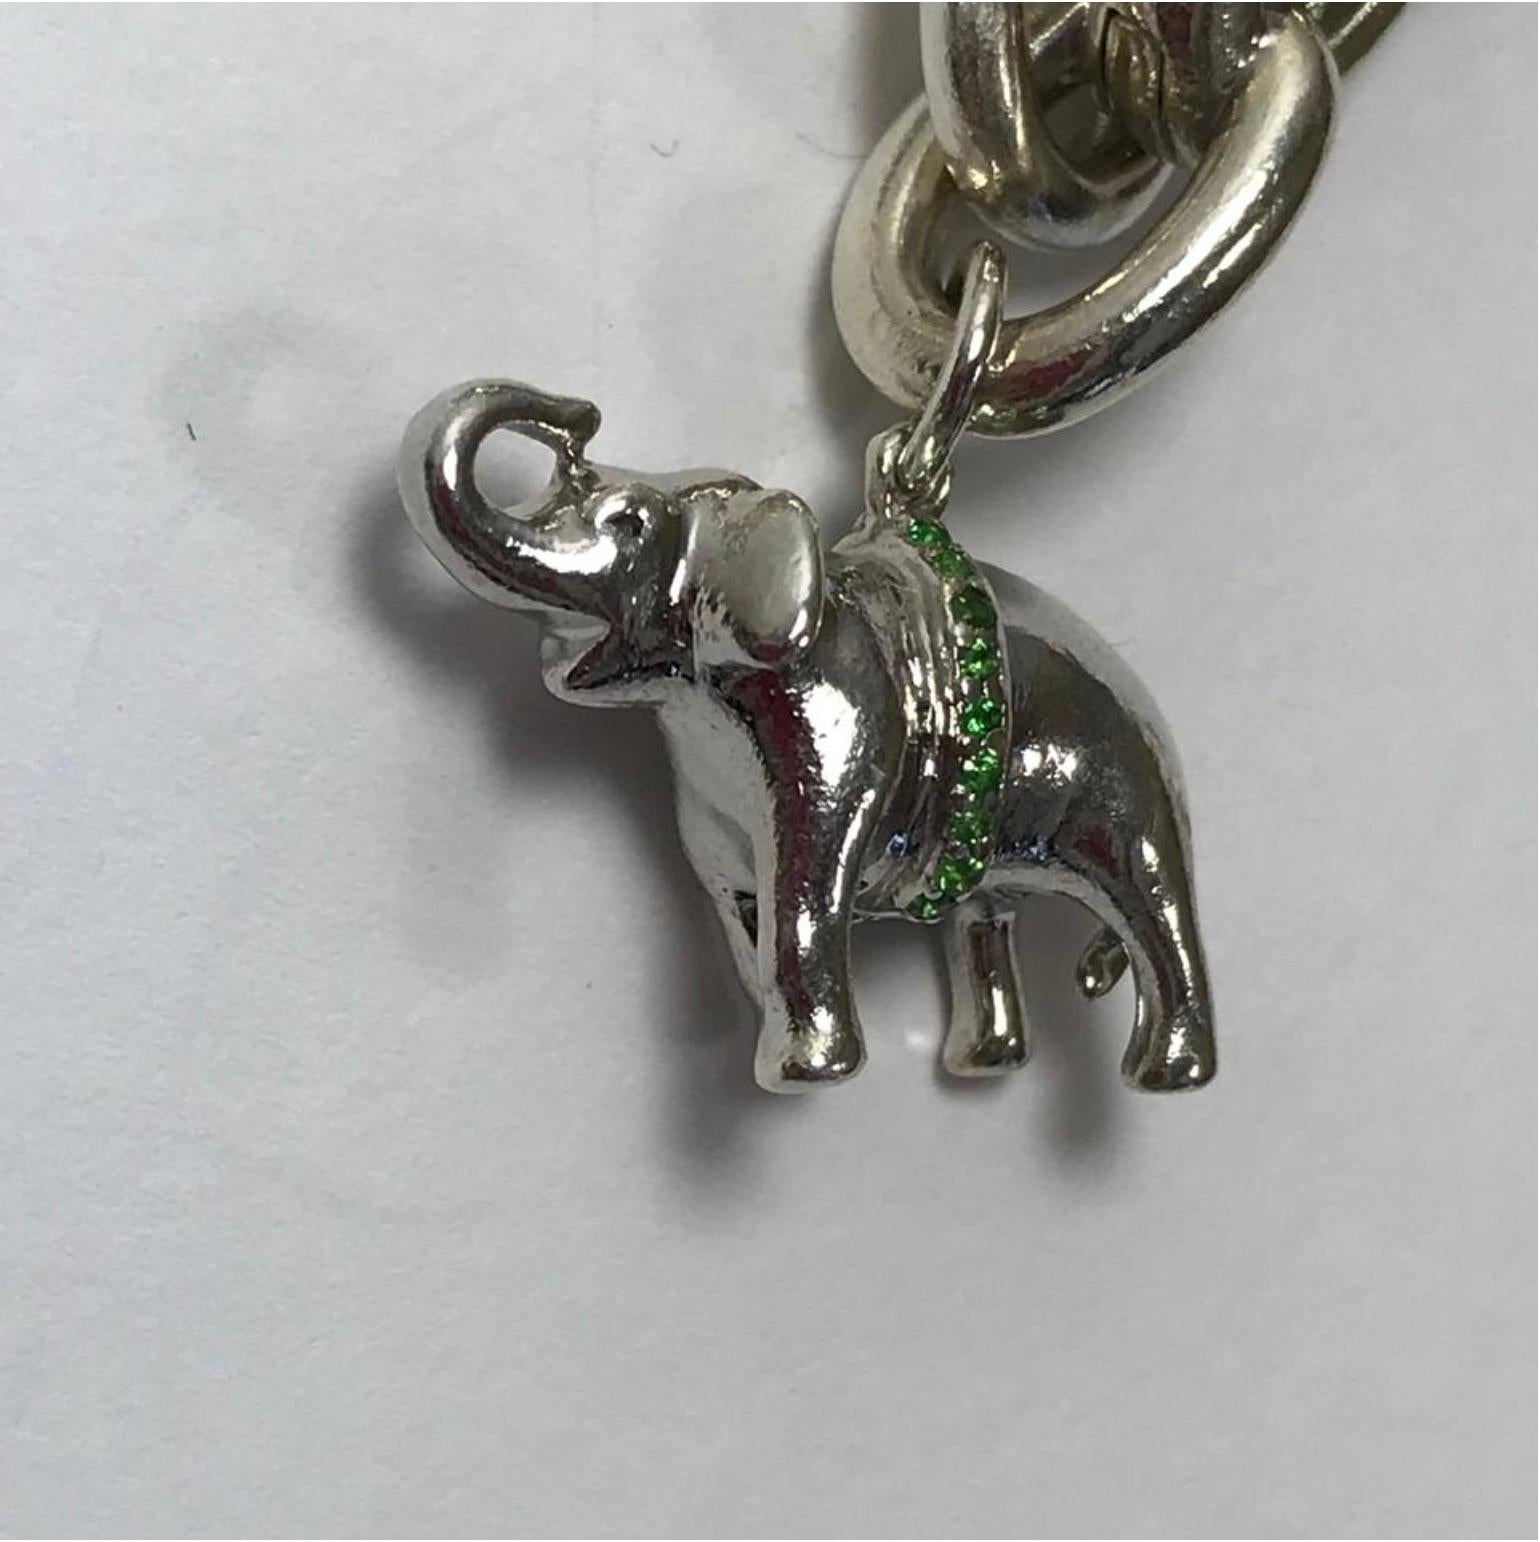 MODEL - Monica Rich Kosann Luck Elephant with Green Tsavorite Charm ONLY

CONDITION - Exceptional!  - No signs of wear.

SKU - 928.7

ORIGINAL RETAIL PRICE - 235 + tax

DIMENSIONS - L.75 x H.6 x W.3

MATERIAL - Sterling Silver with Green